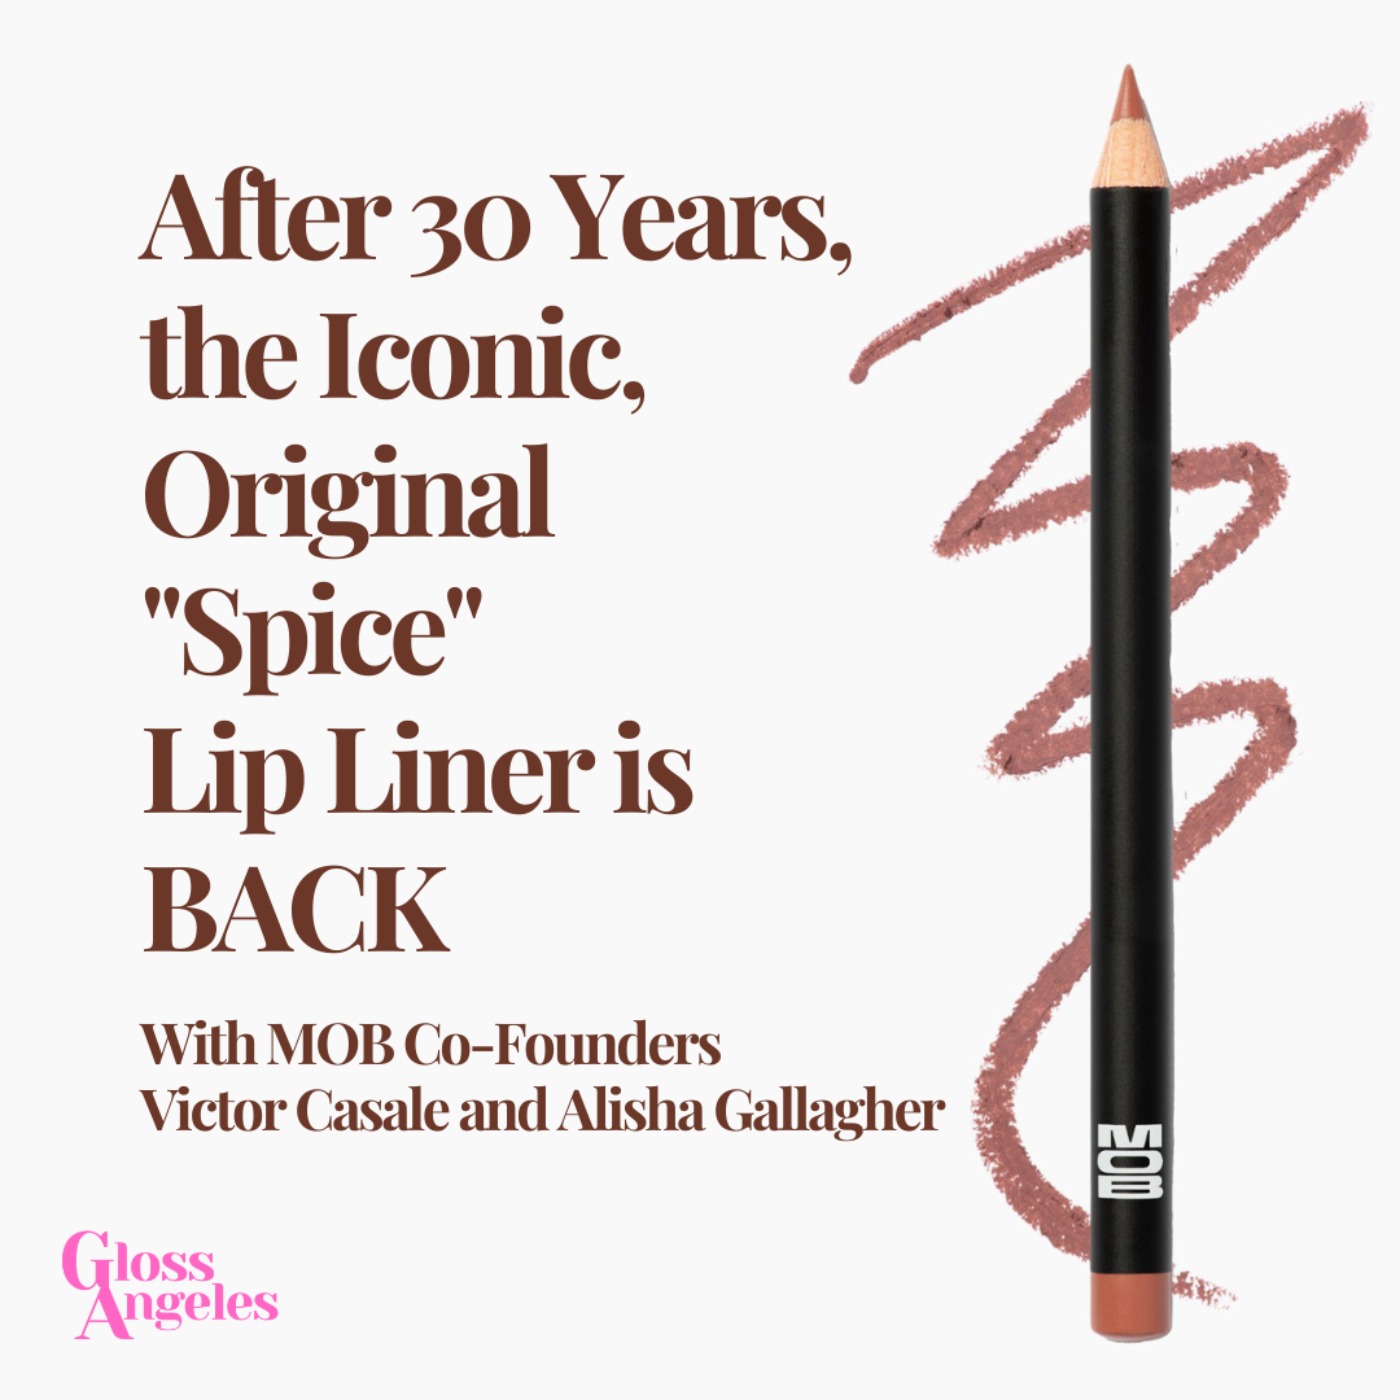 After 30 Years, the Iconic, Original "Spice" Lip Liner is BACK